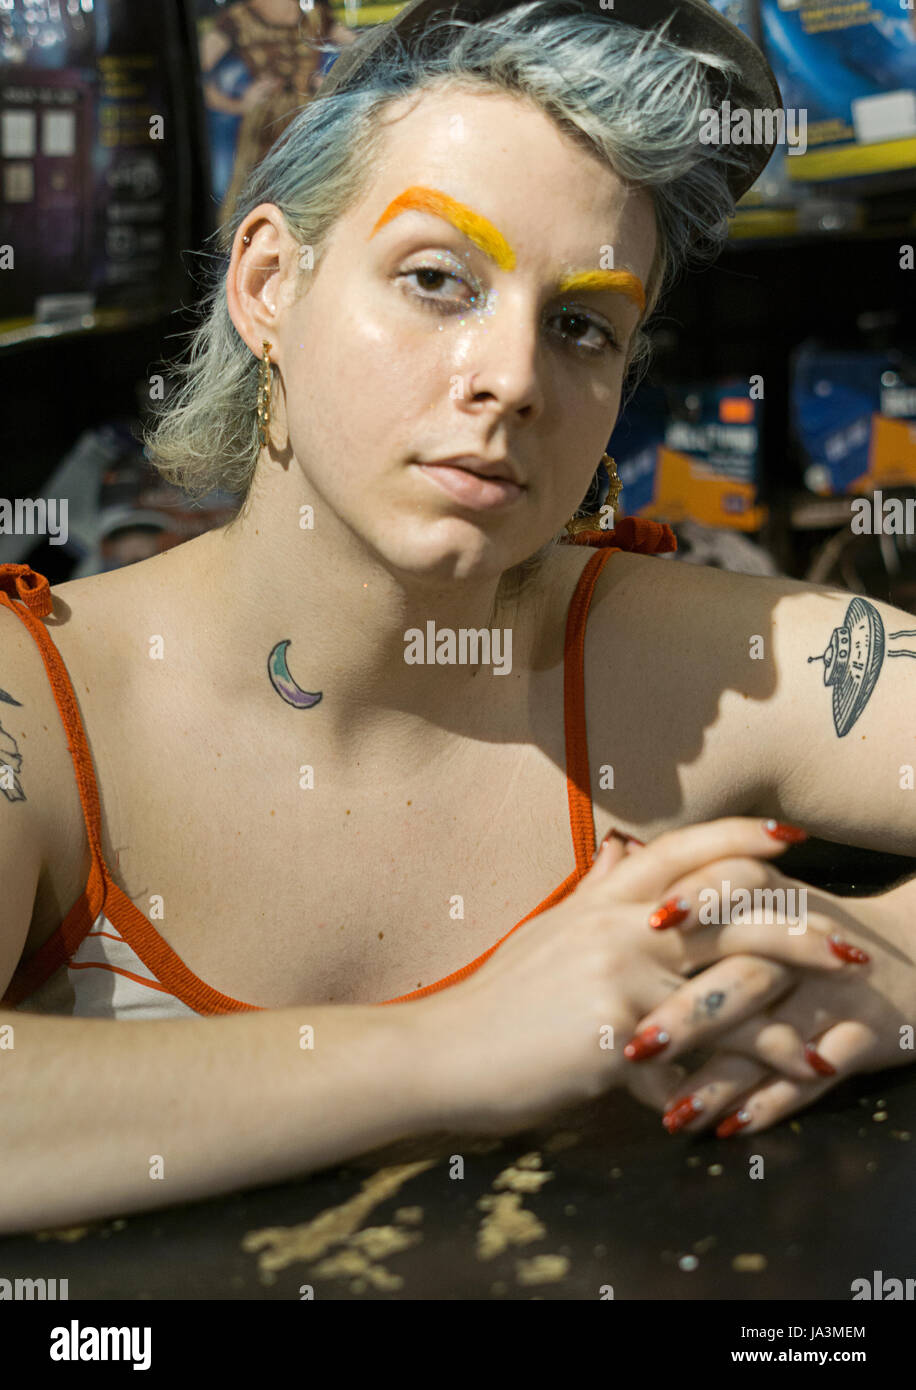 Posed portrait of a transitioning transgender woman with orange eyebrows blue hair and red nail polish. In Manhattan, New York City. Stock Photo